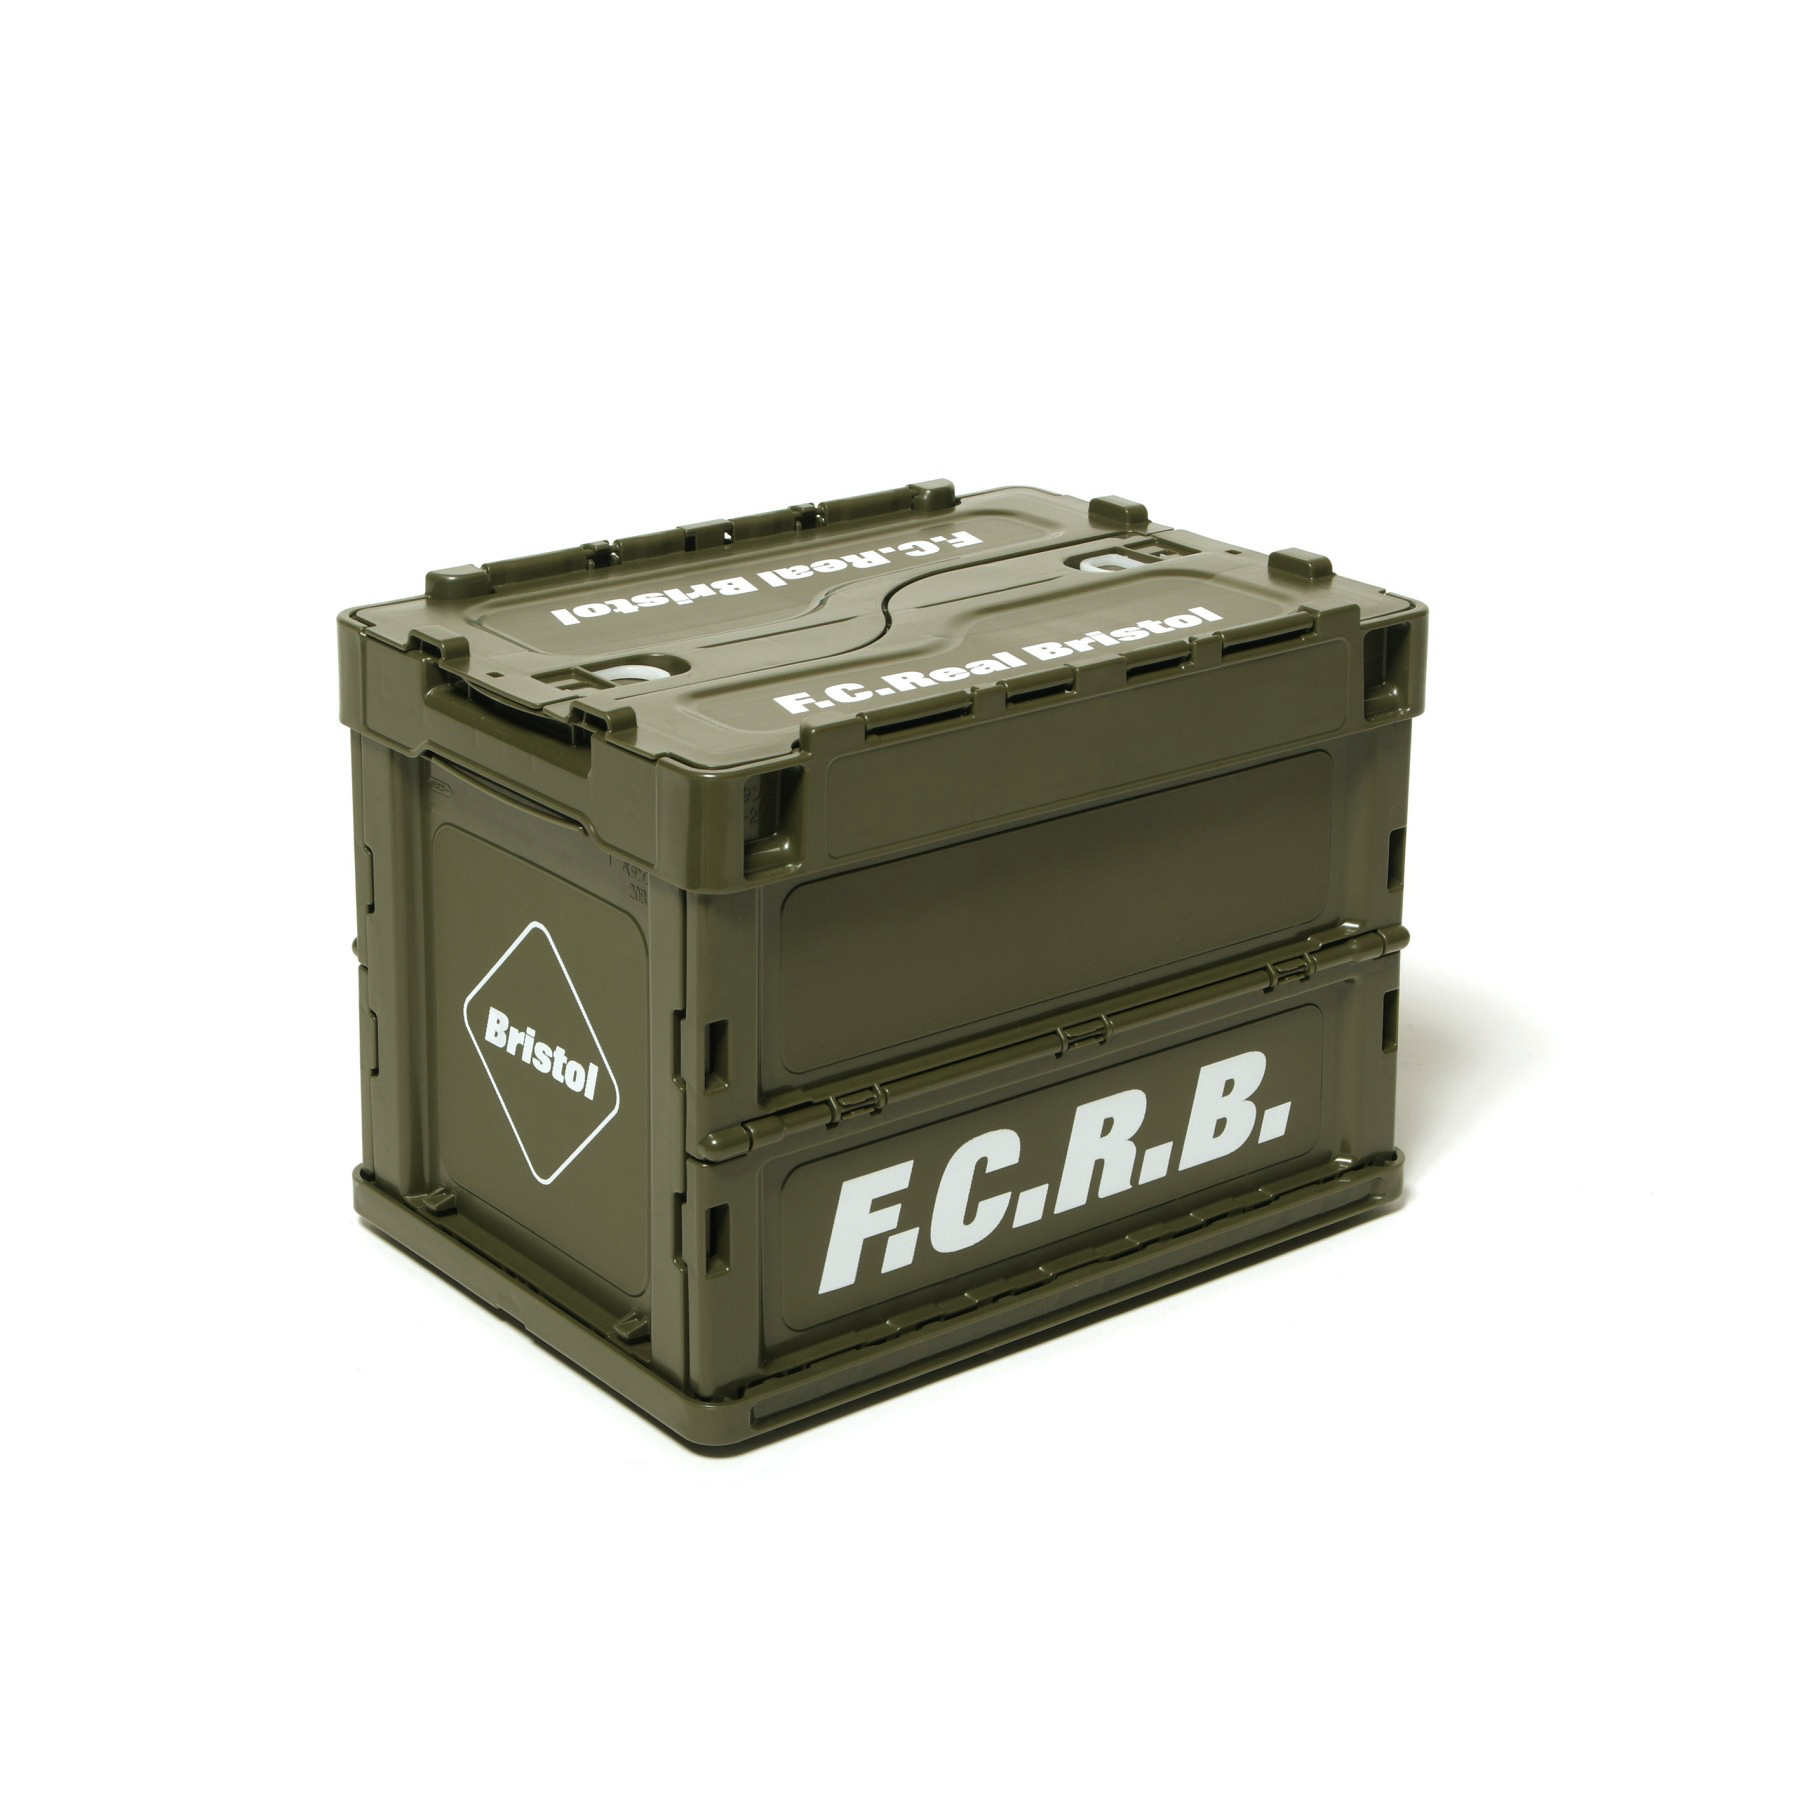 FCRB コンテナ SMALL FOLDABLE CONTAINER カーキ | www.fleettracktz.com